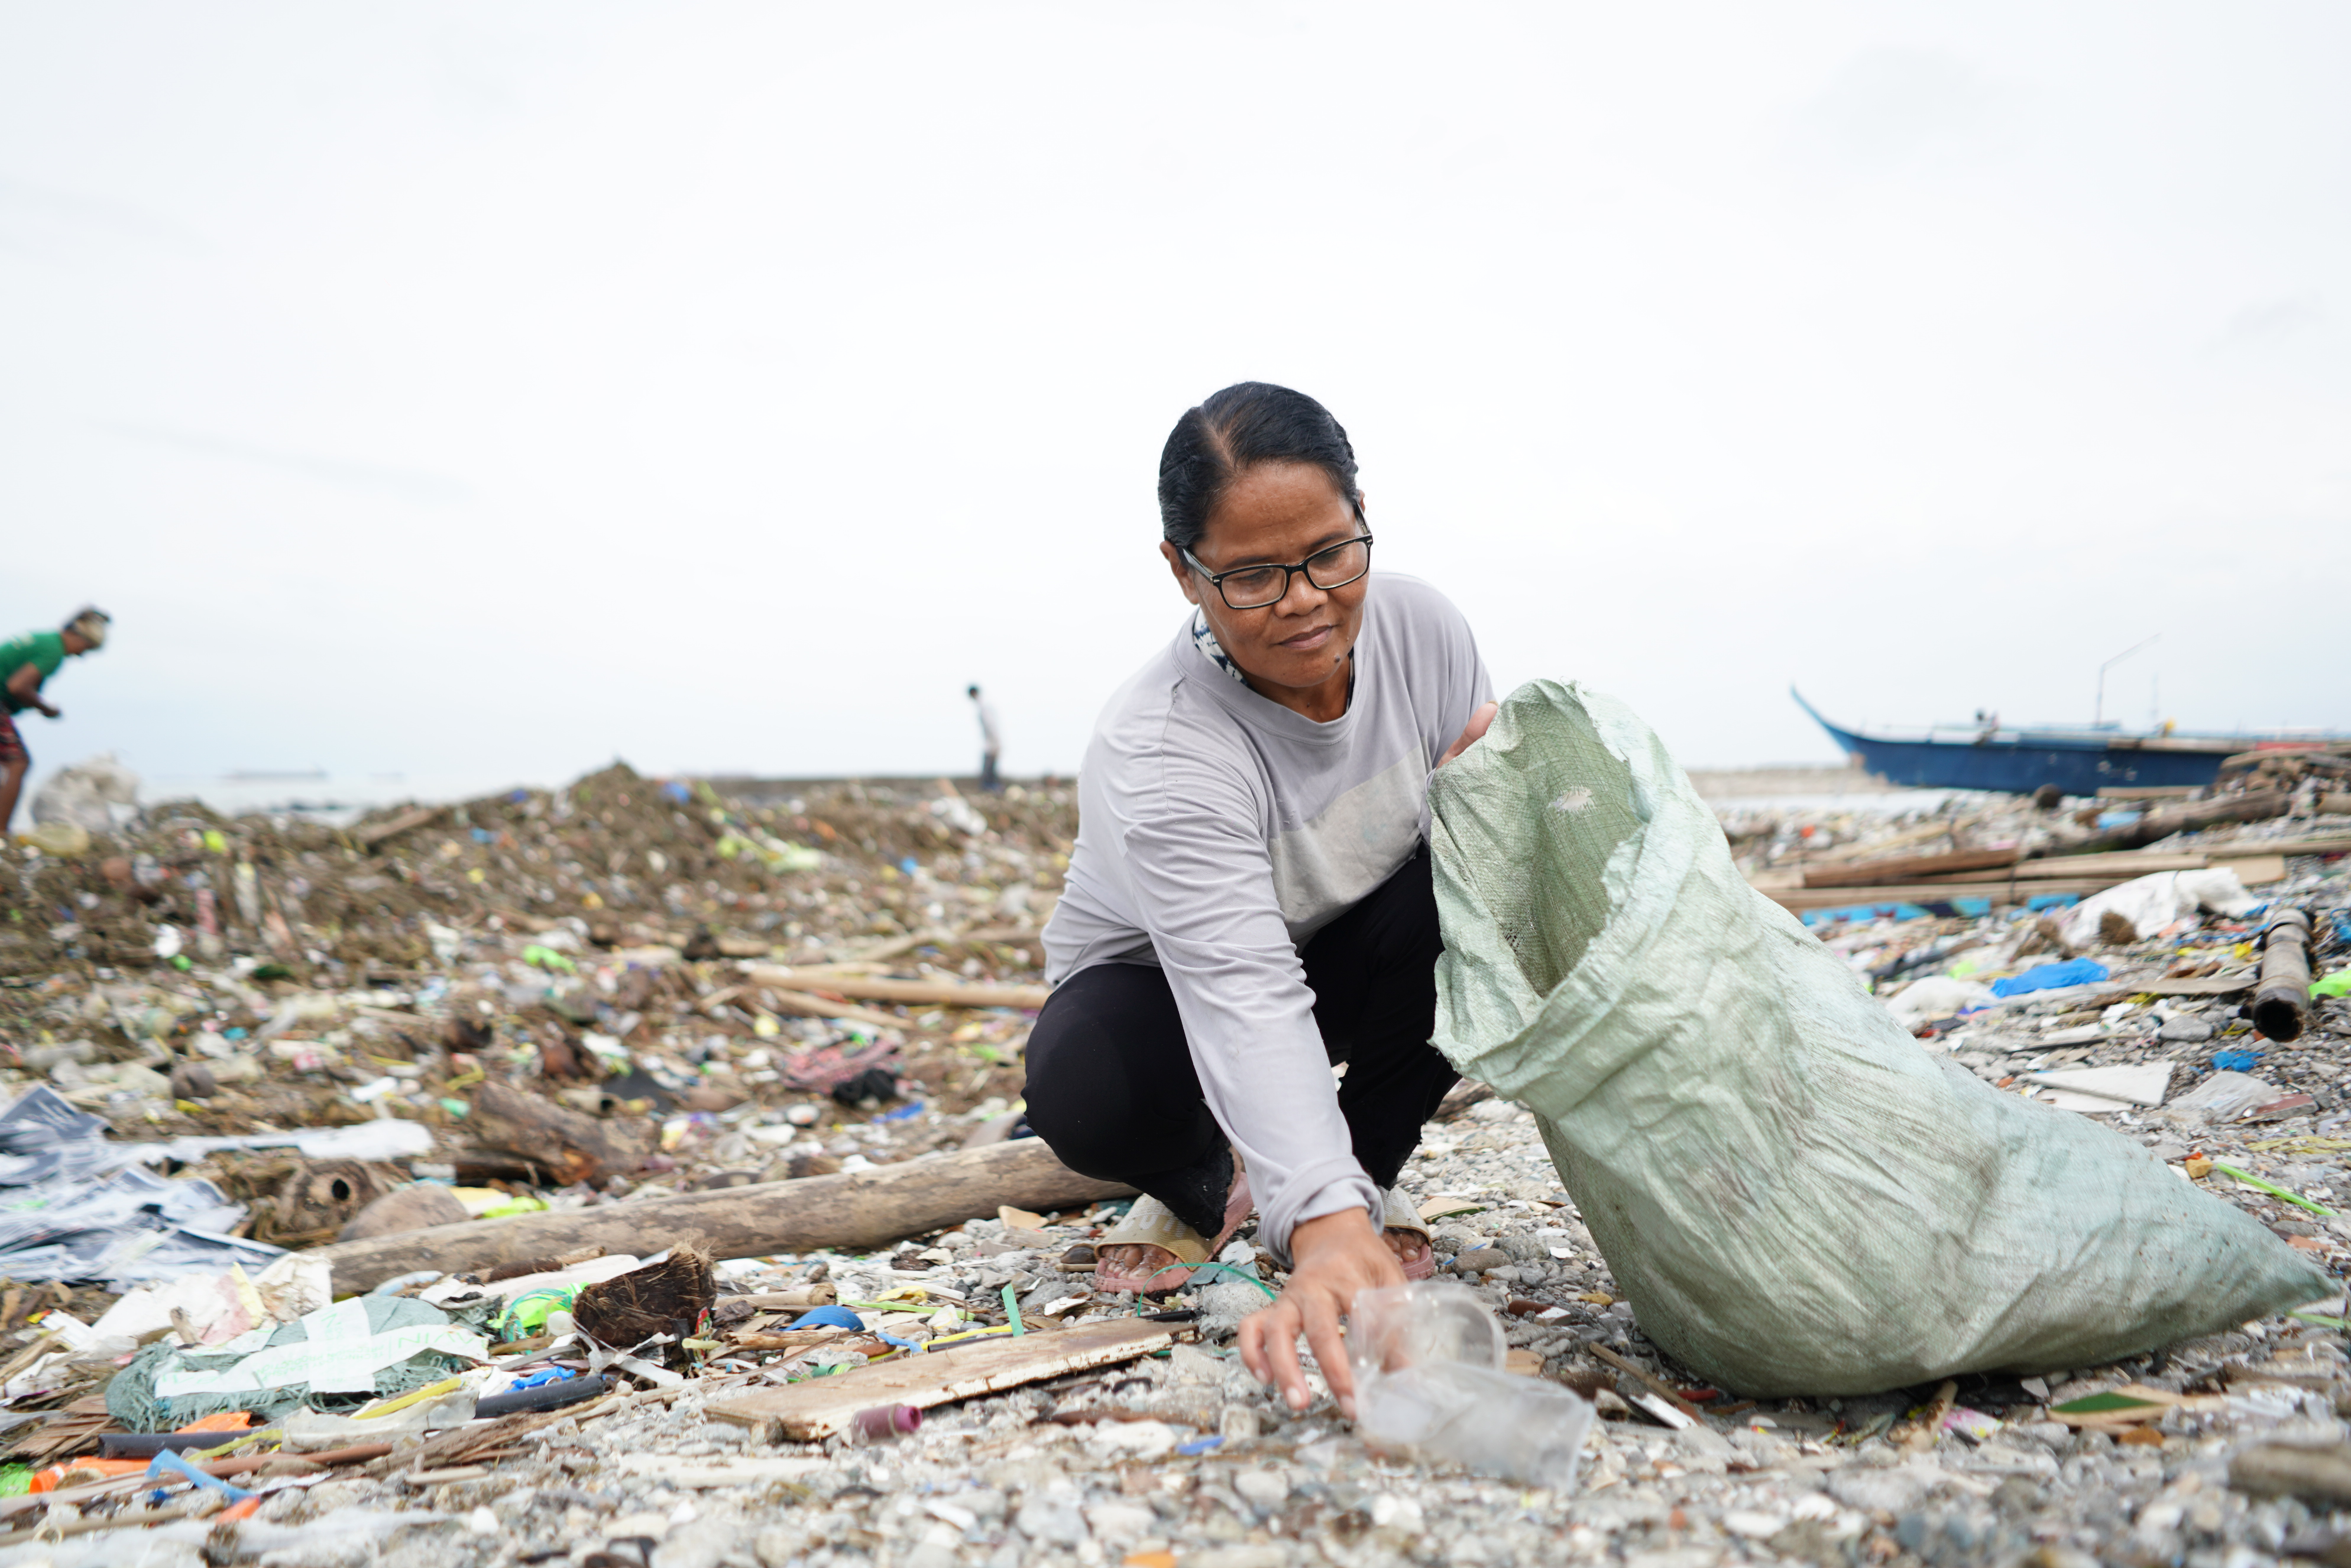 UPM cooperates with Plastic Bank to support Plastic Waste Avoidance and Recycling in the Philippines